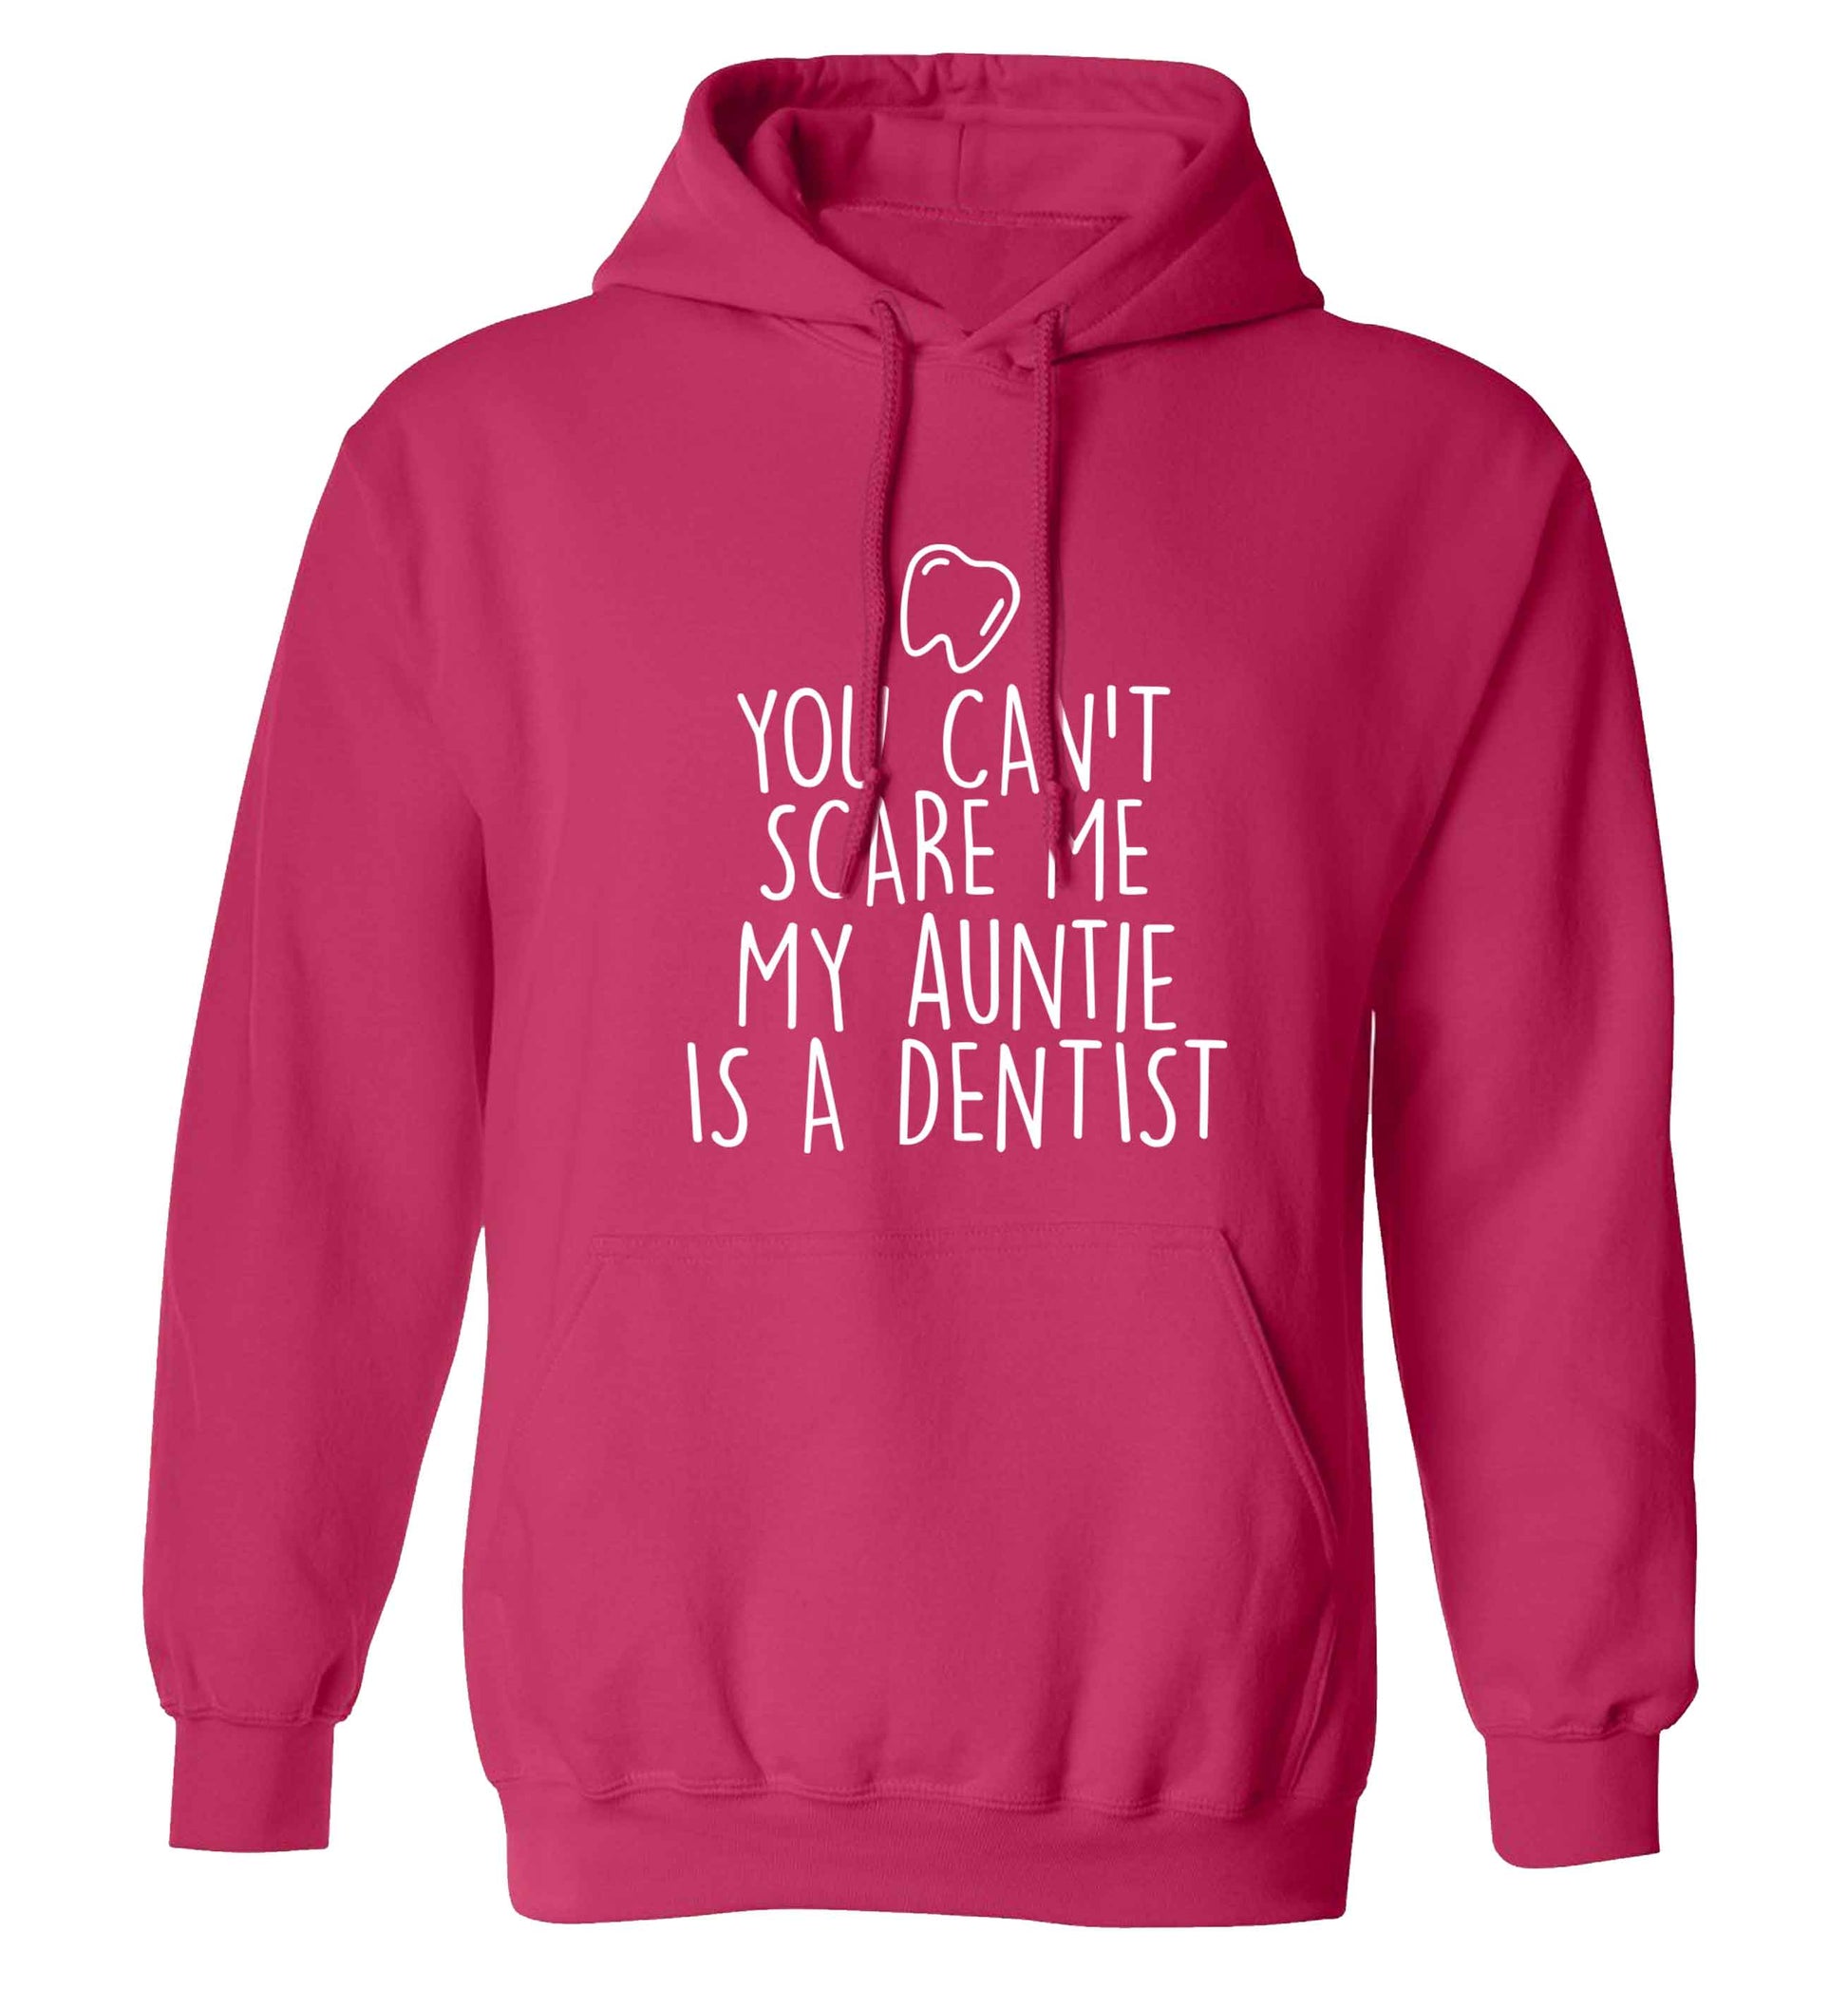 You can't scare me my auntie is a dentist adults unisex pink hoodie 2XL